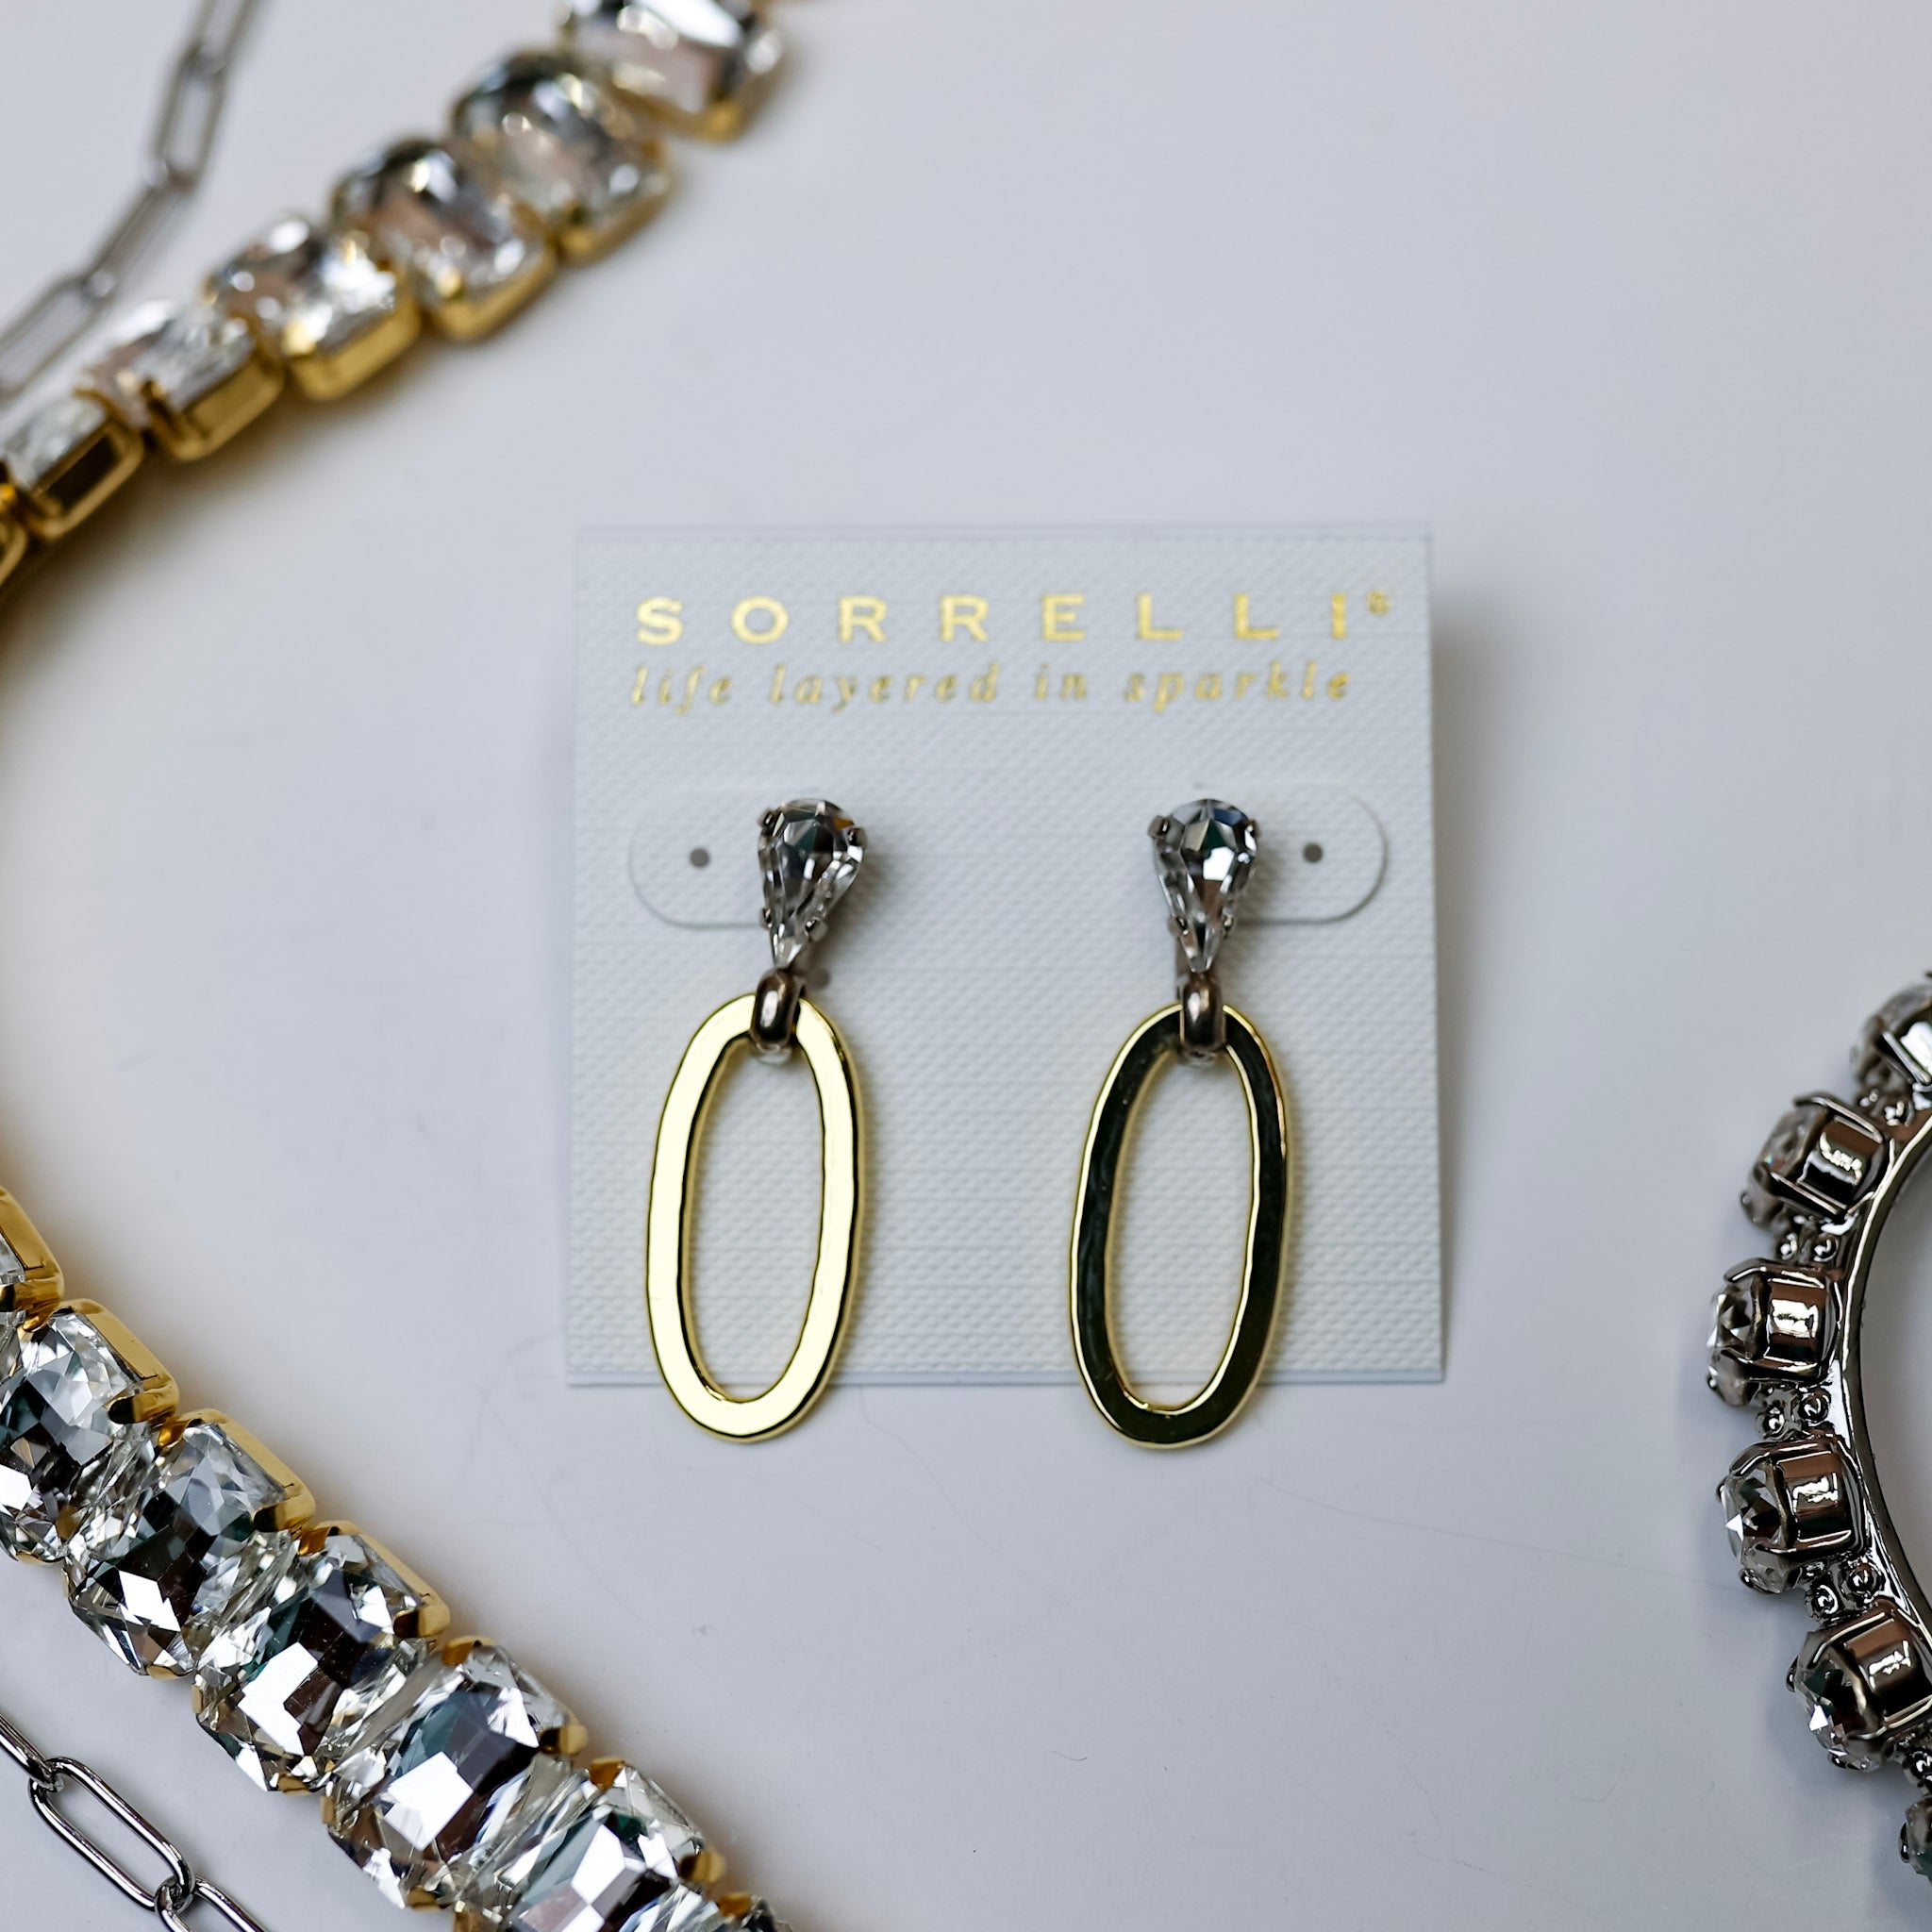 A pair of crystal post earrings with a gold tone oval dangle. Pictured on a white background with crystal necklaces.